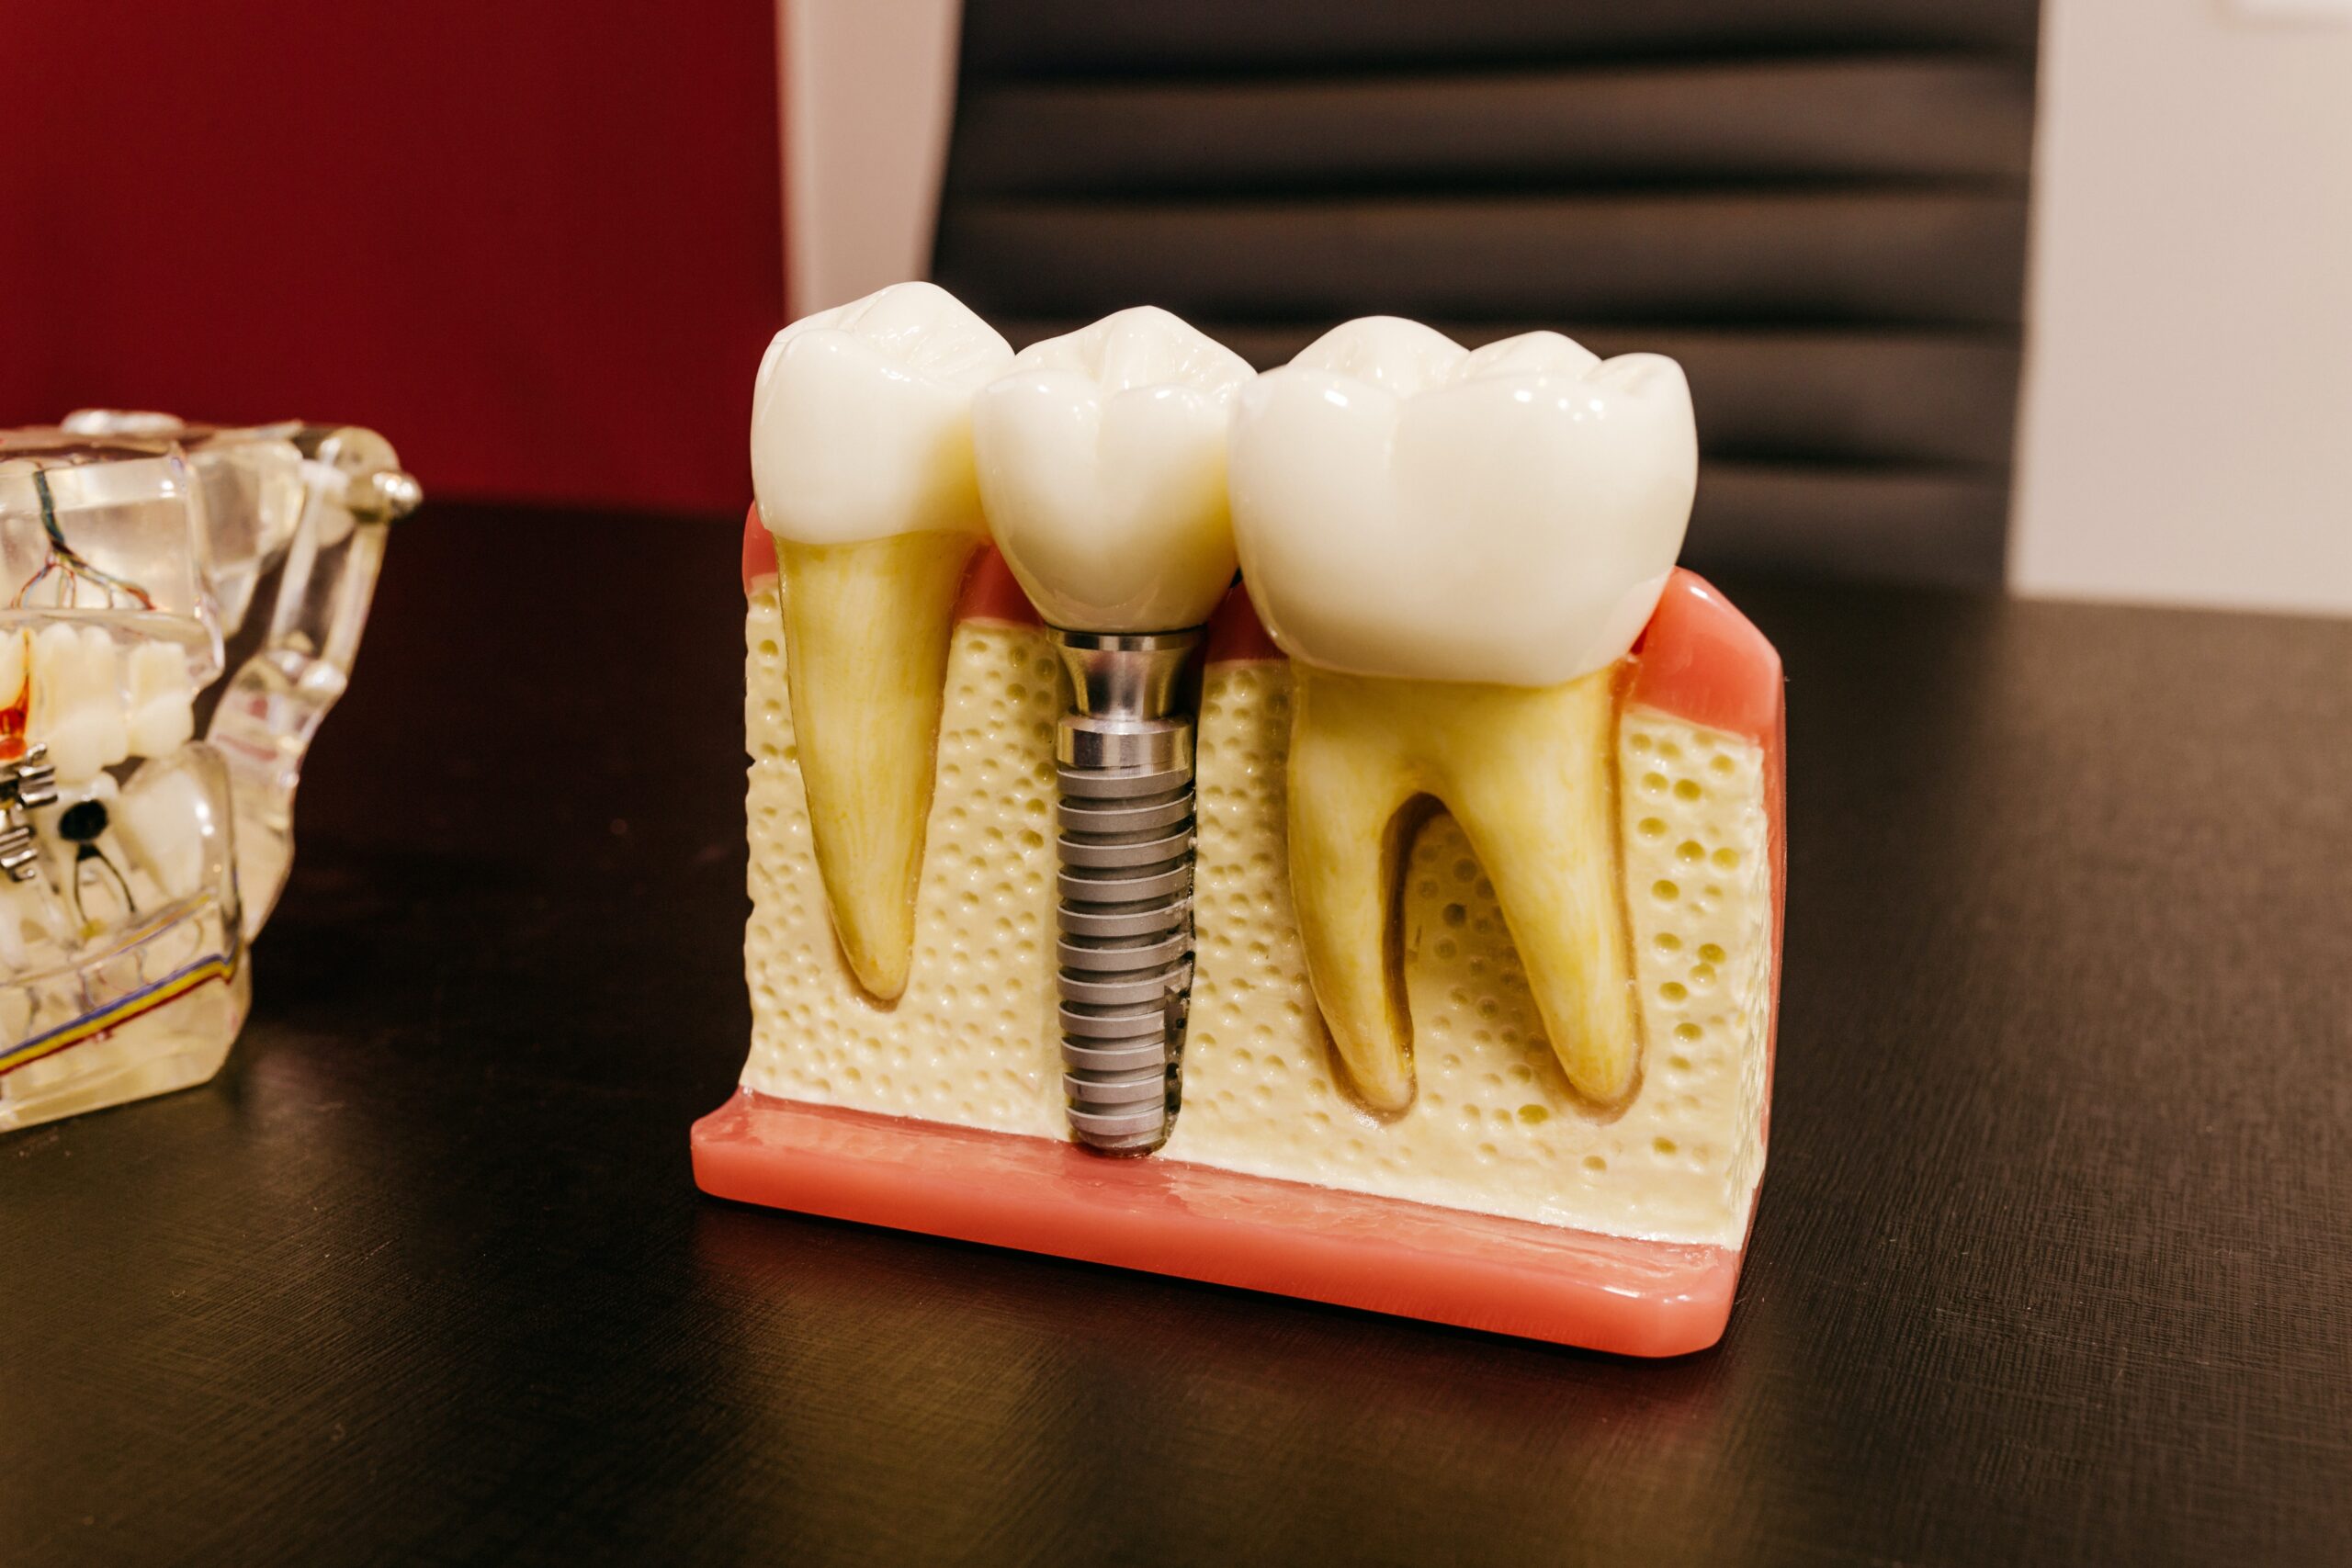 dental implants with screw on the table in clinic image